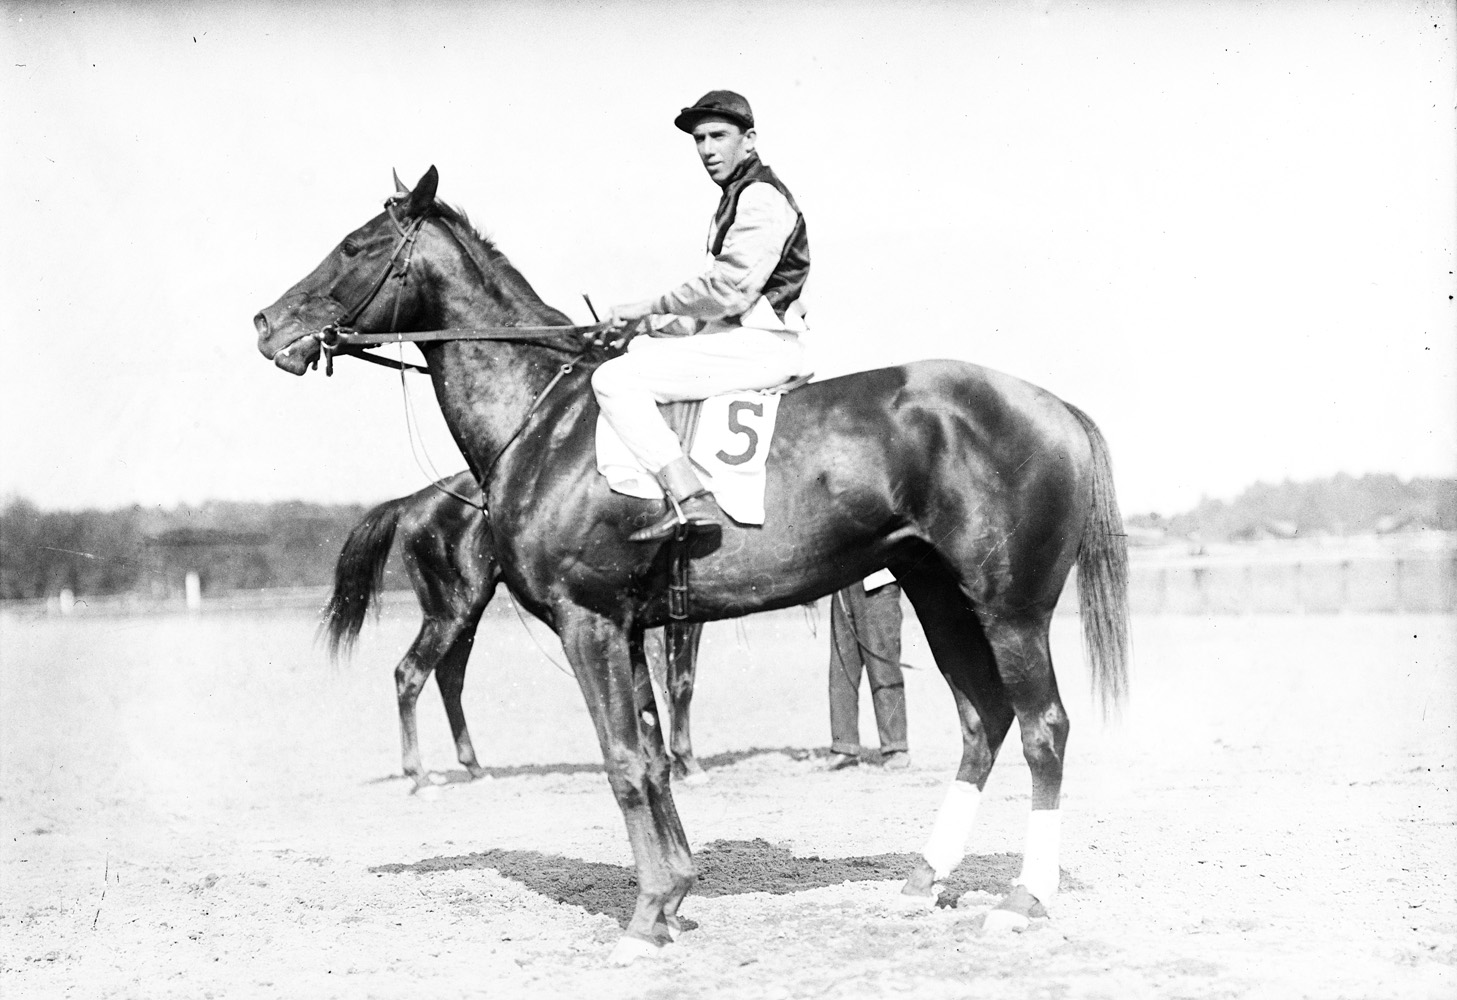 Carroll Shilling and Novelty at Saratoga, August 1910 (Keeneland Library Cook Collection)